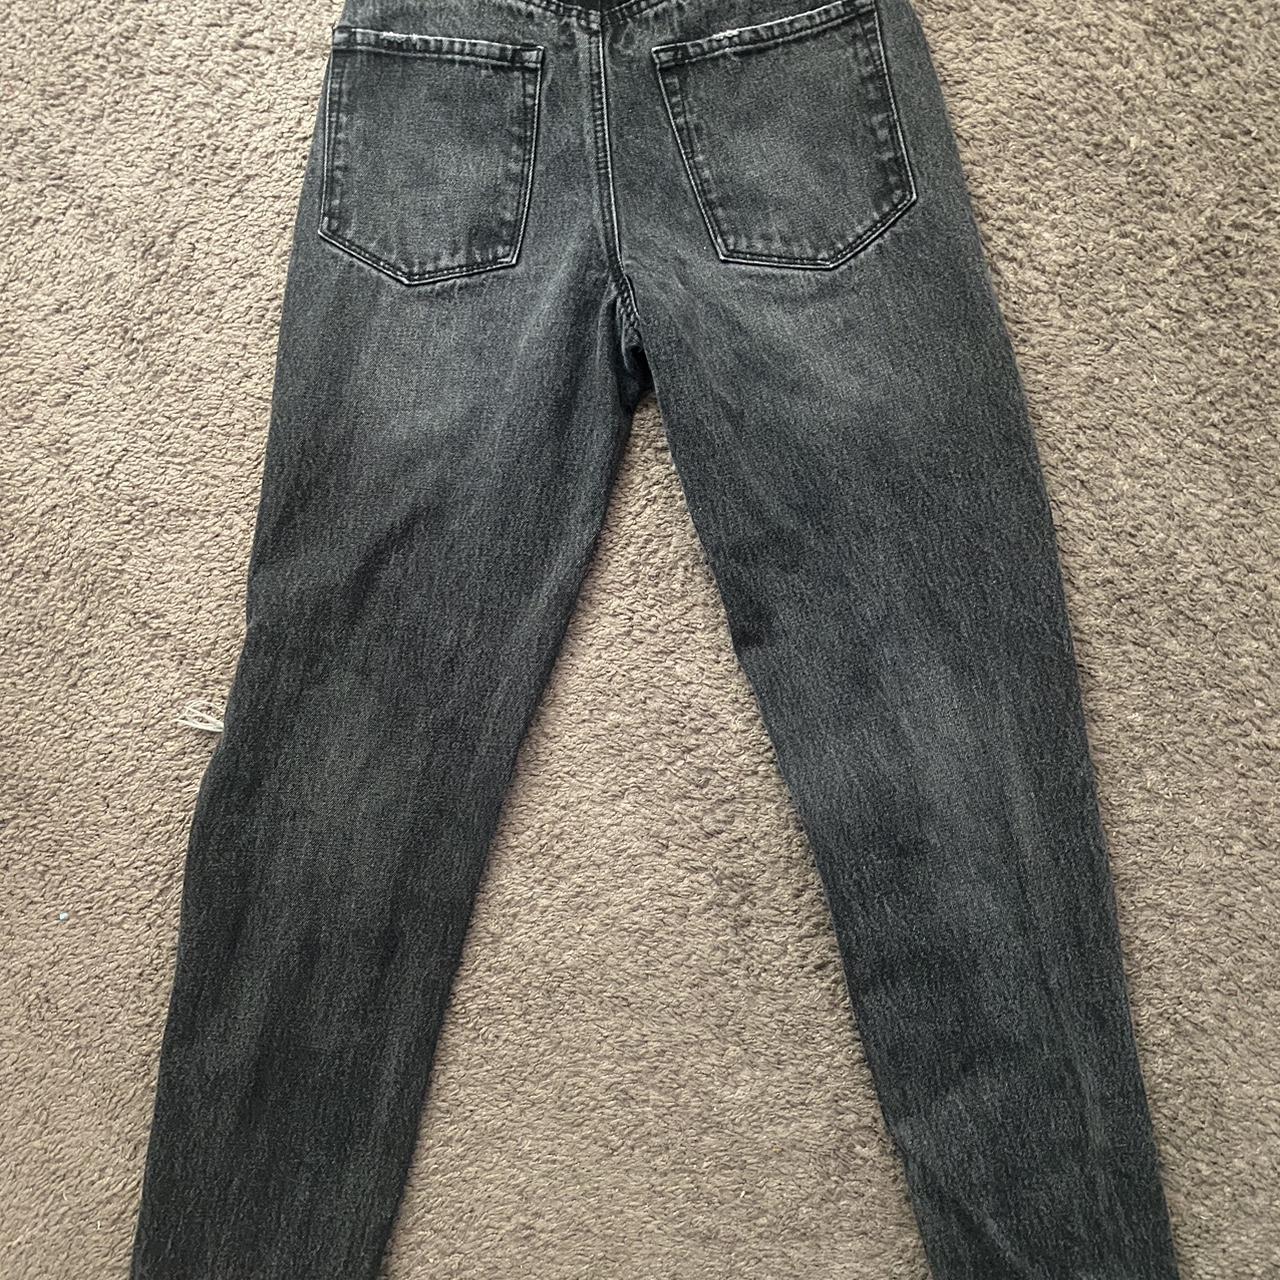 RSQ ripped jeans 90s style In great condition - Depop